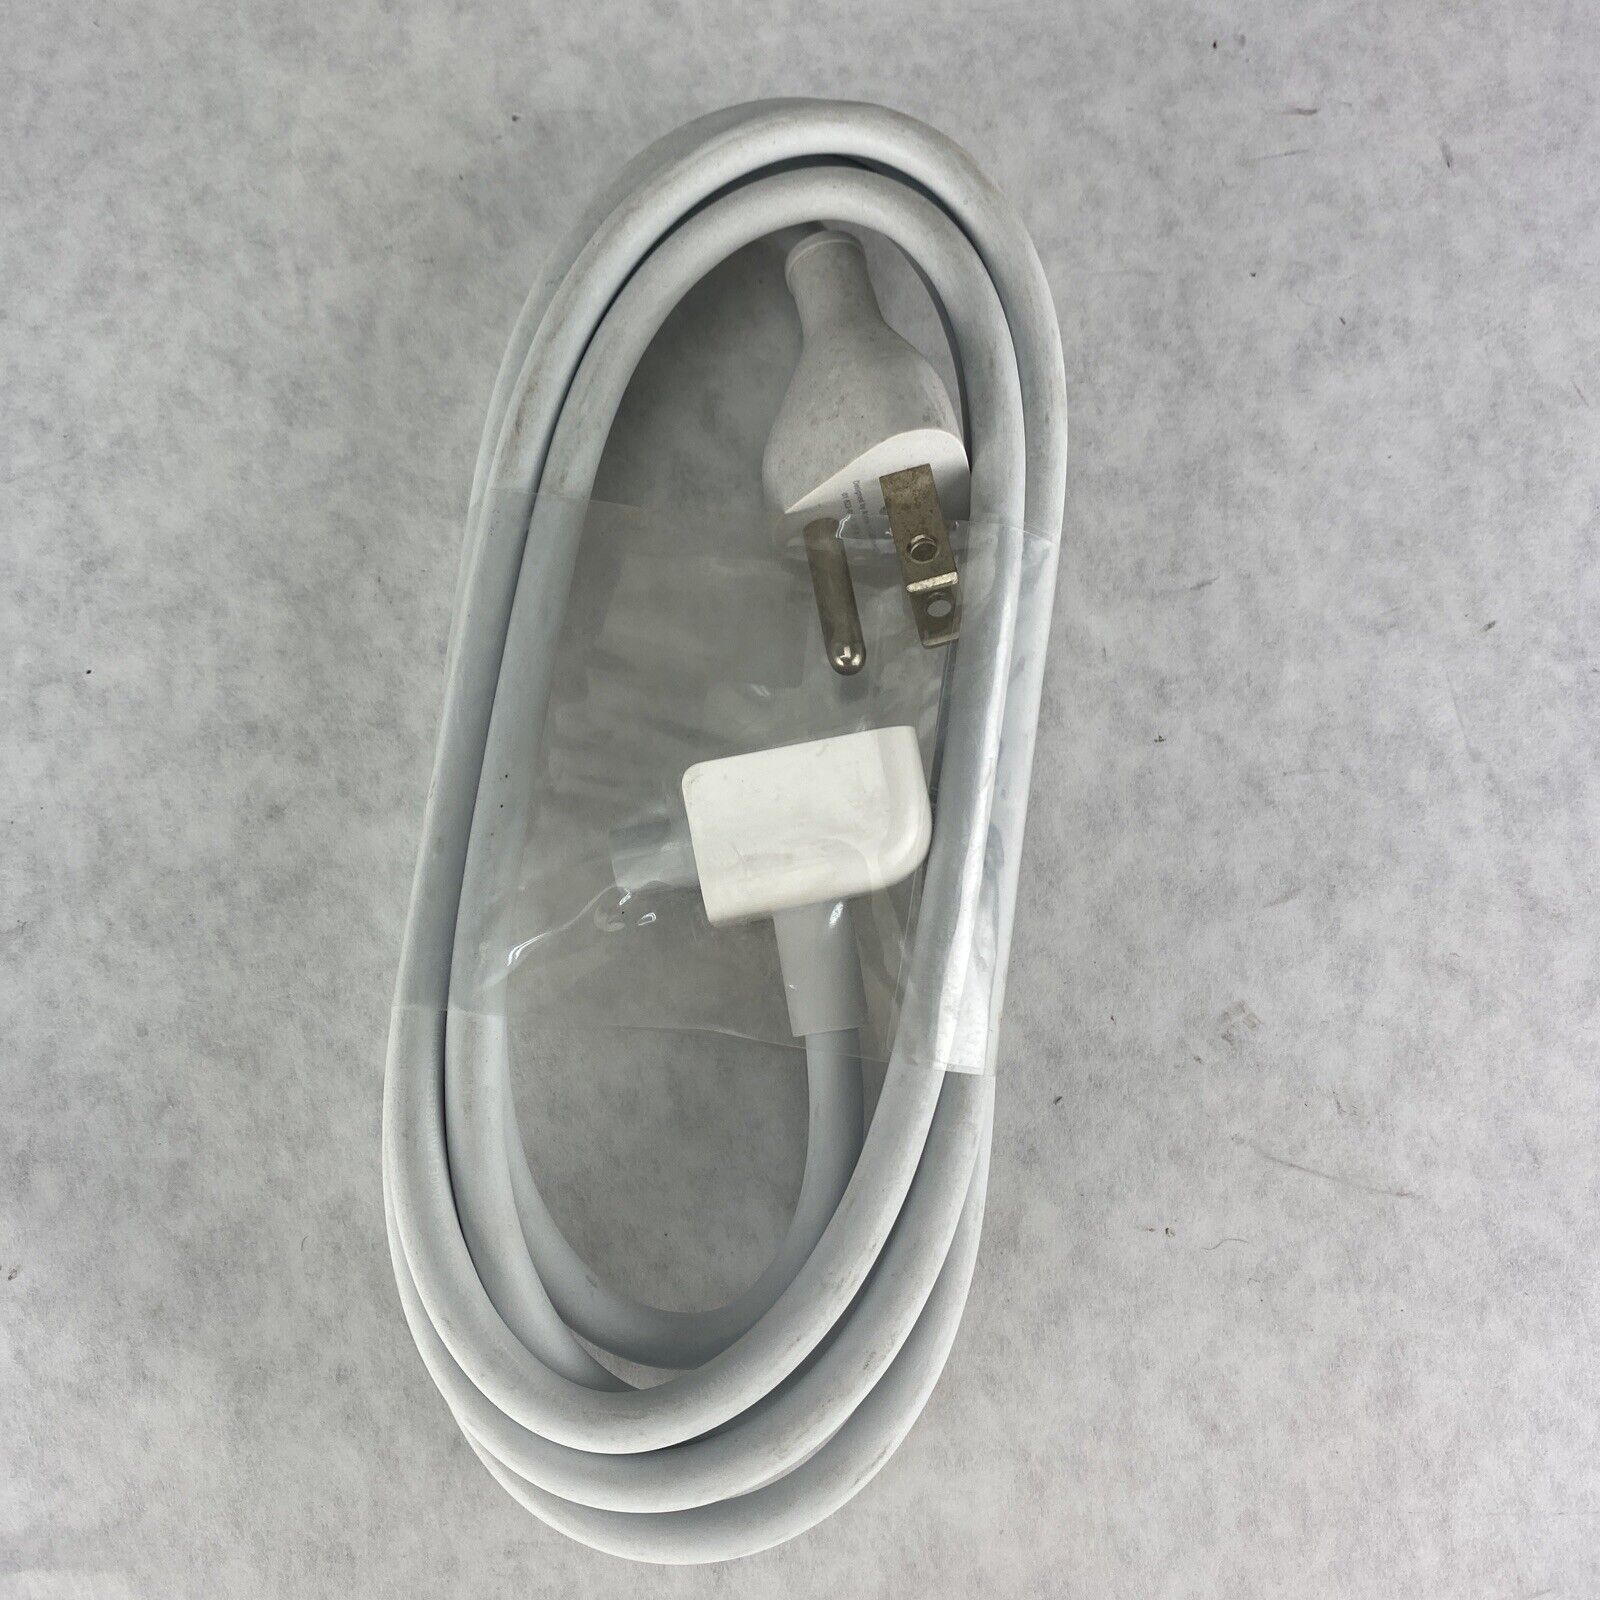 Apple Macbook Charger Volex APC7H Power Cord Charging Extender Cable White NOS